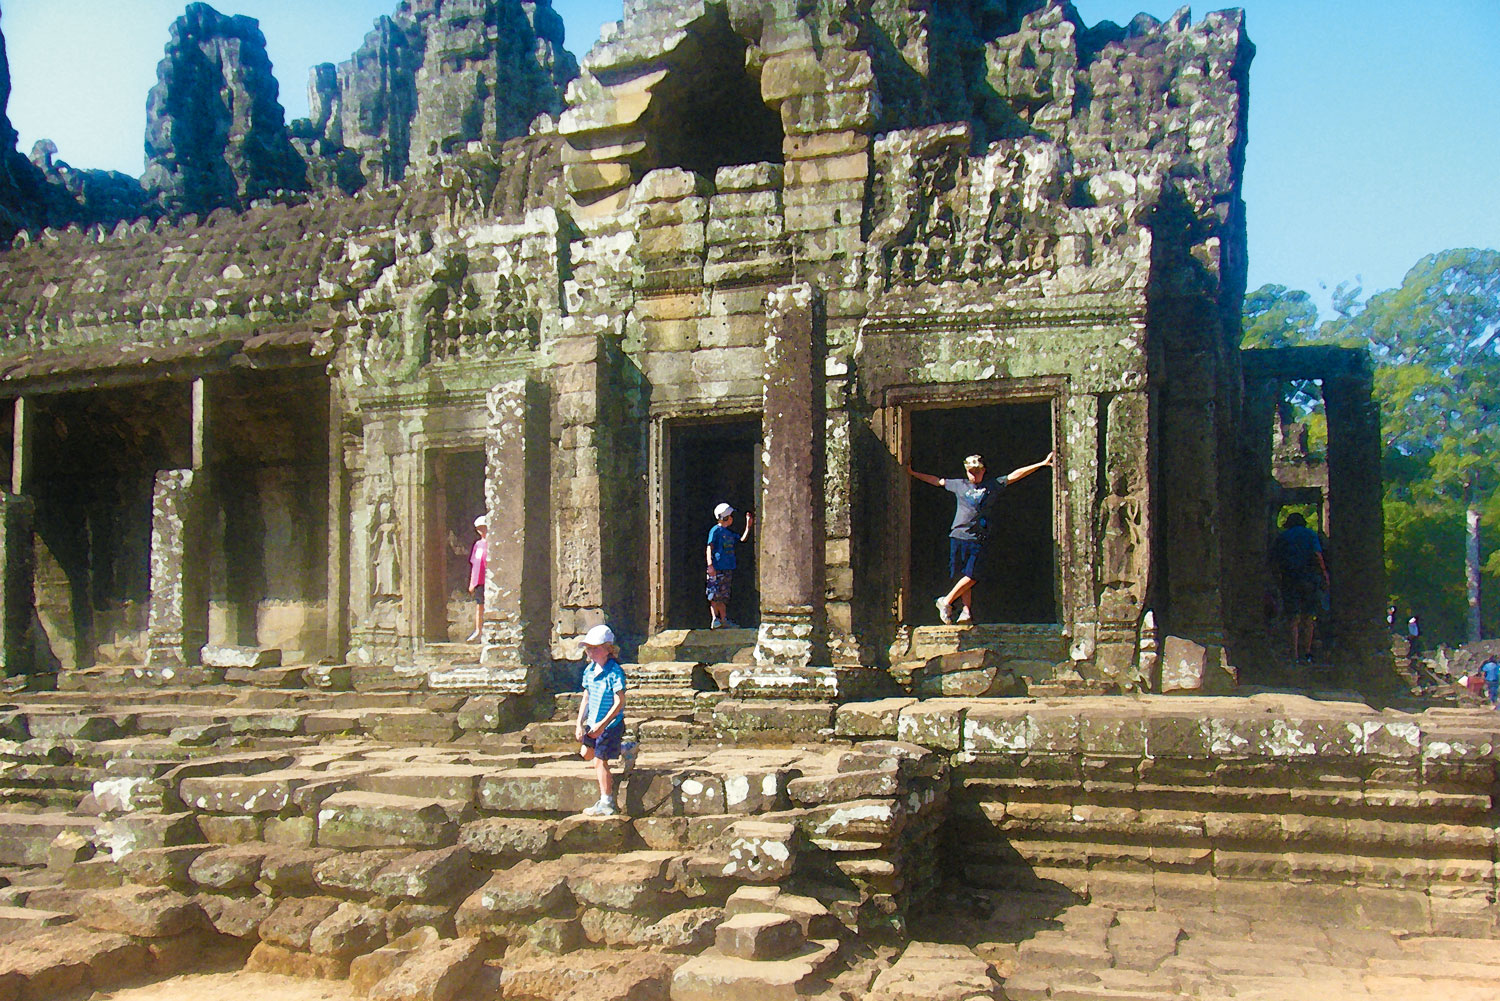 Family holiday featuring Cambodia's ancient temples.